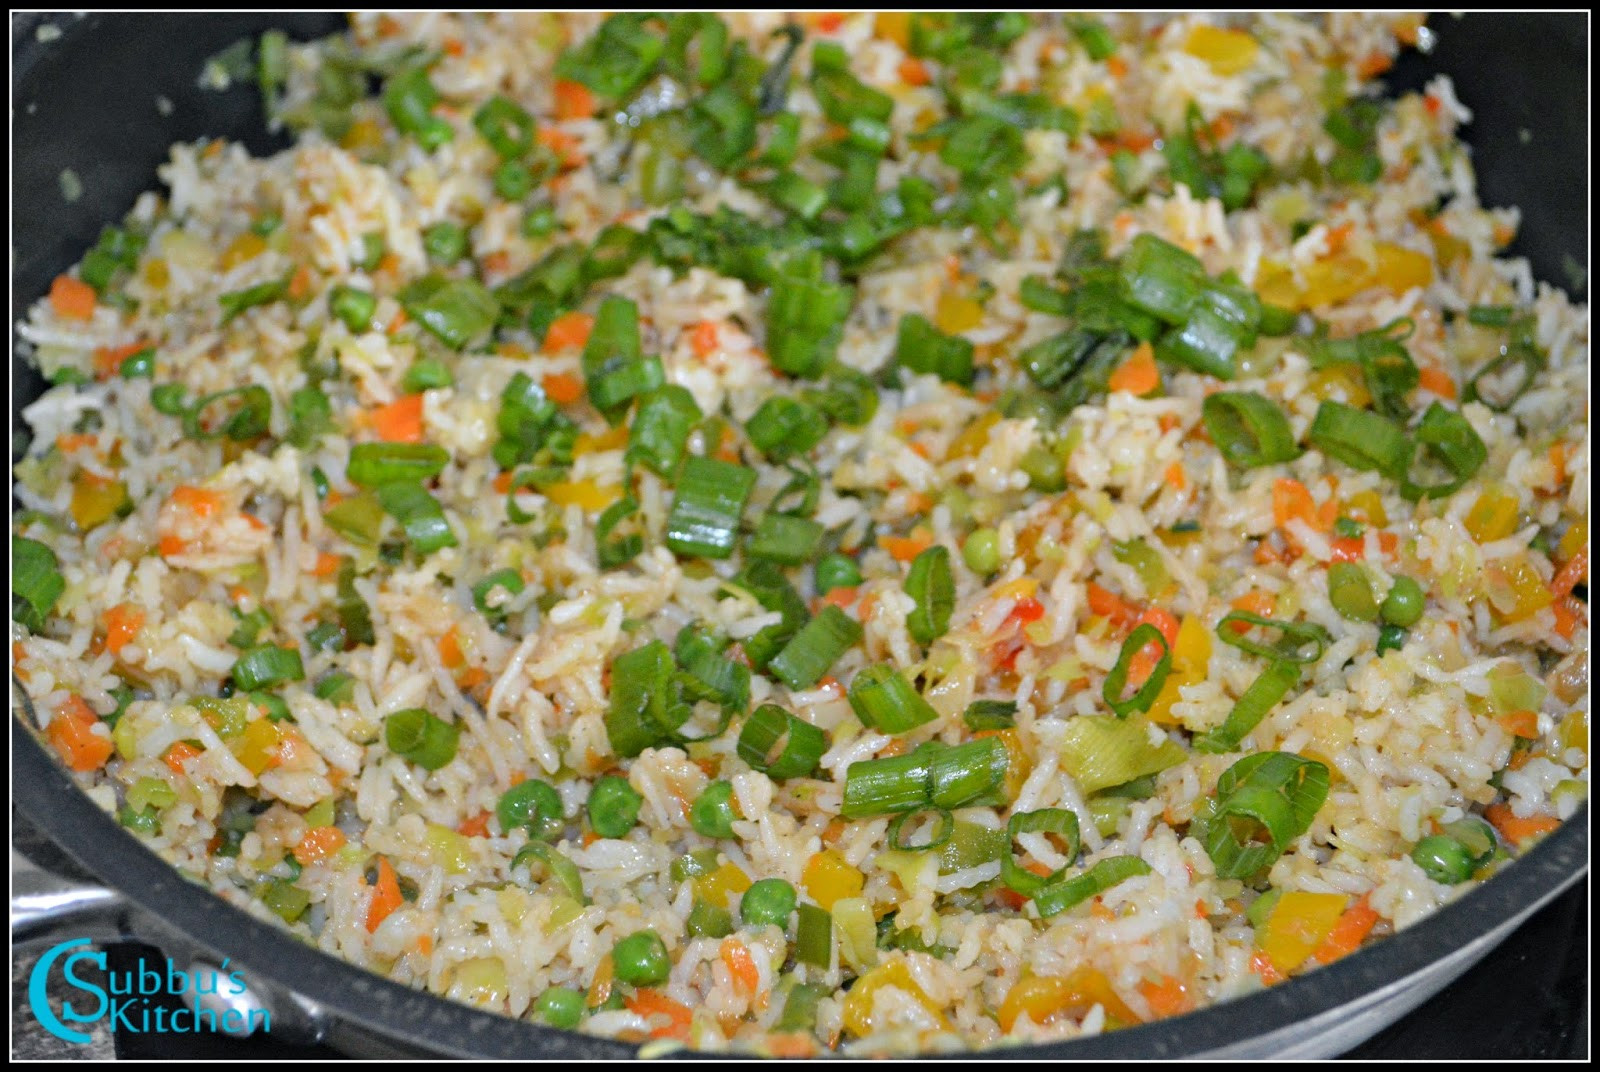 Chinese Fried Rice Veg
 Chinese Ve able Fried Rice Recipe